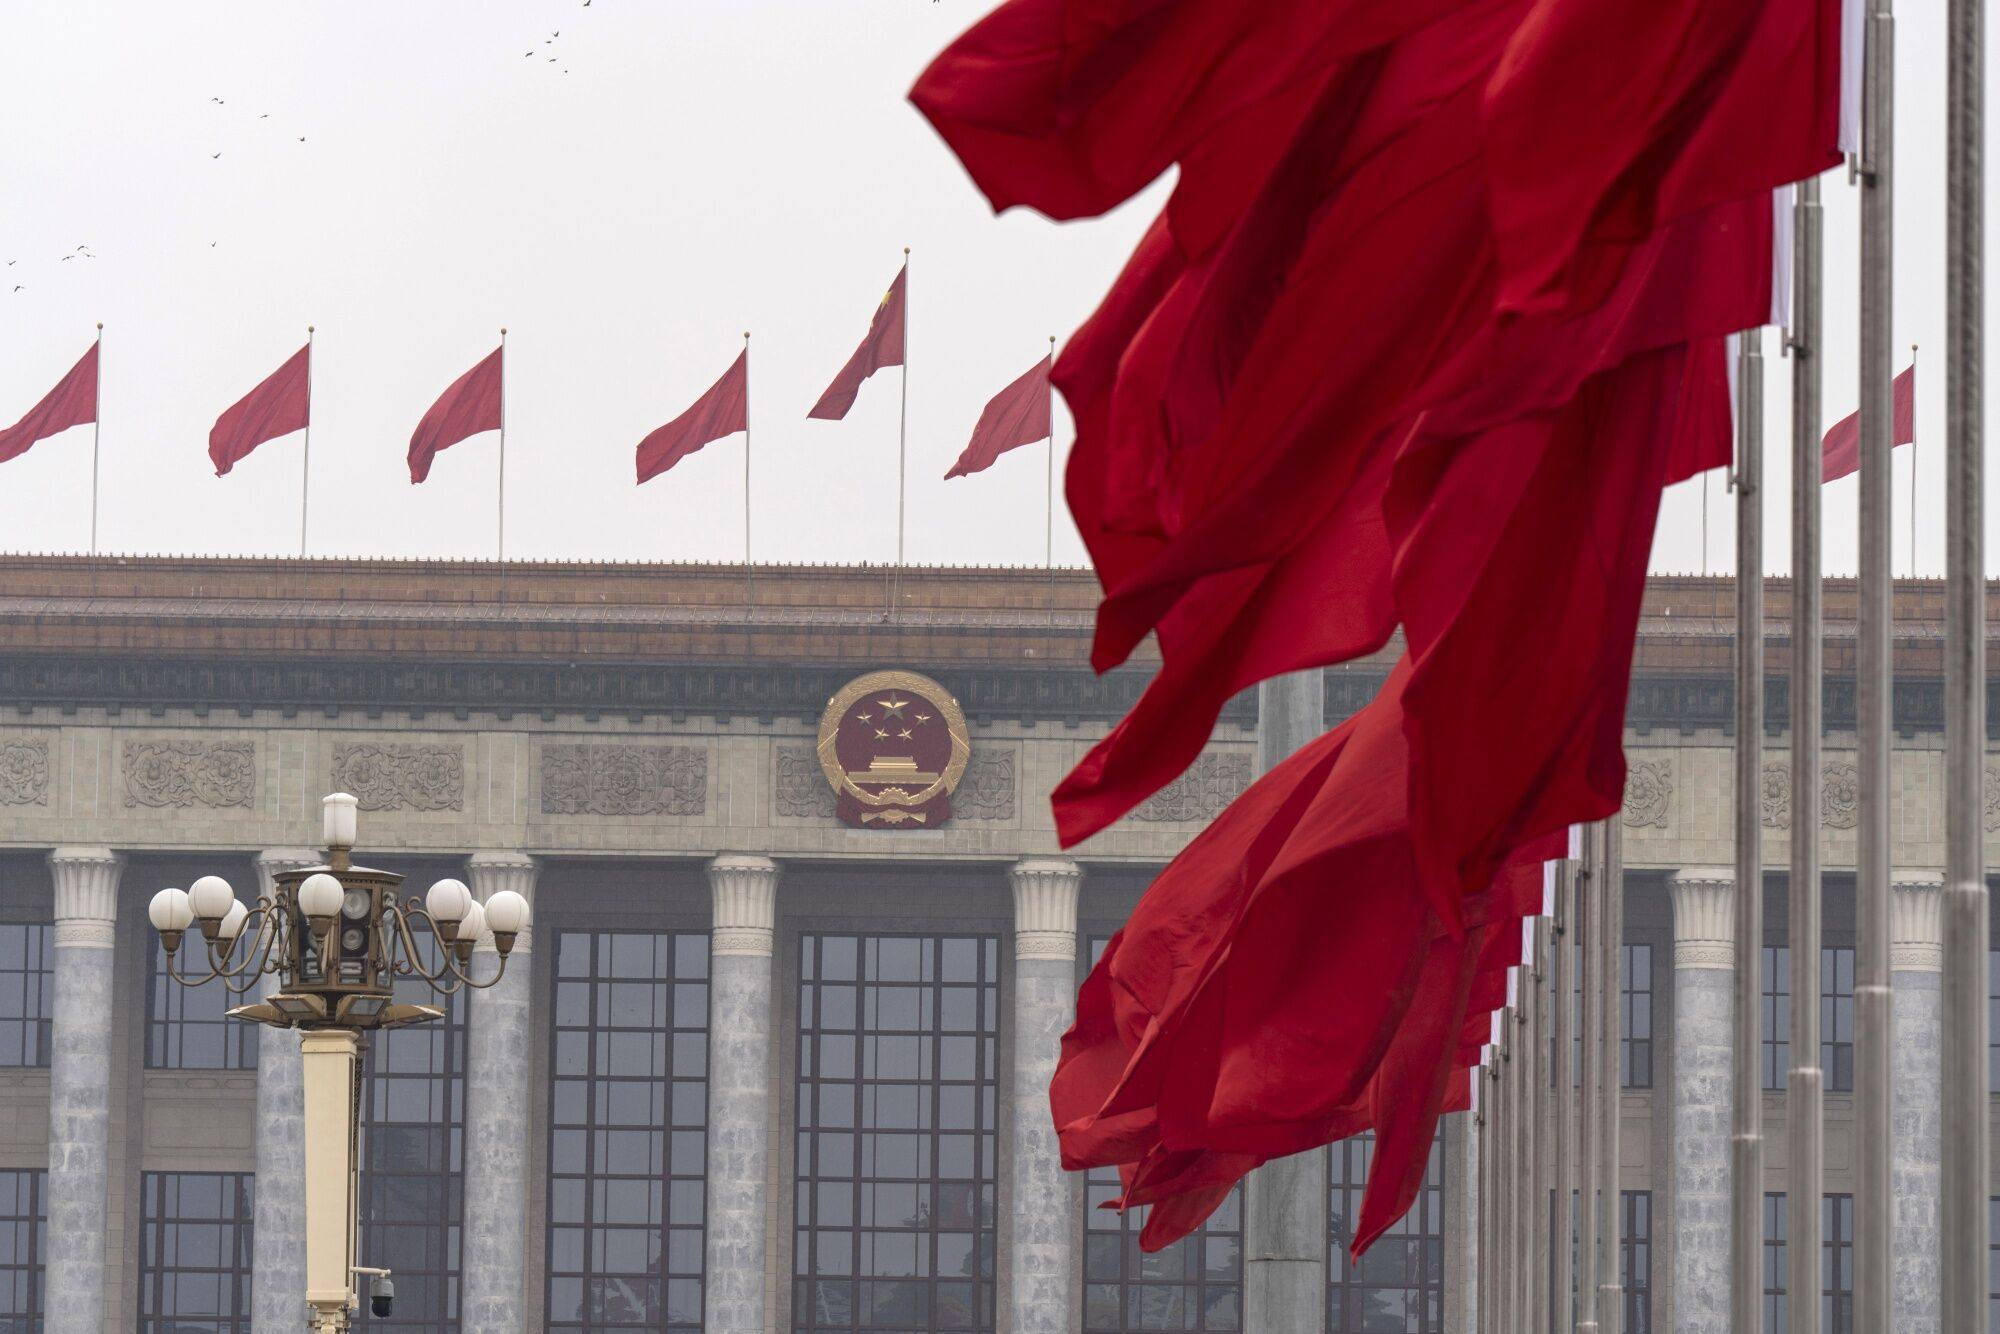 In this week’s issue of the Global Impact newsletter, we take a look ahead to China’s third plenum, which has been a landmark occasion since Deng Xiaoping’s groundbreaking reforms in 1978. Photo: Bloomberg